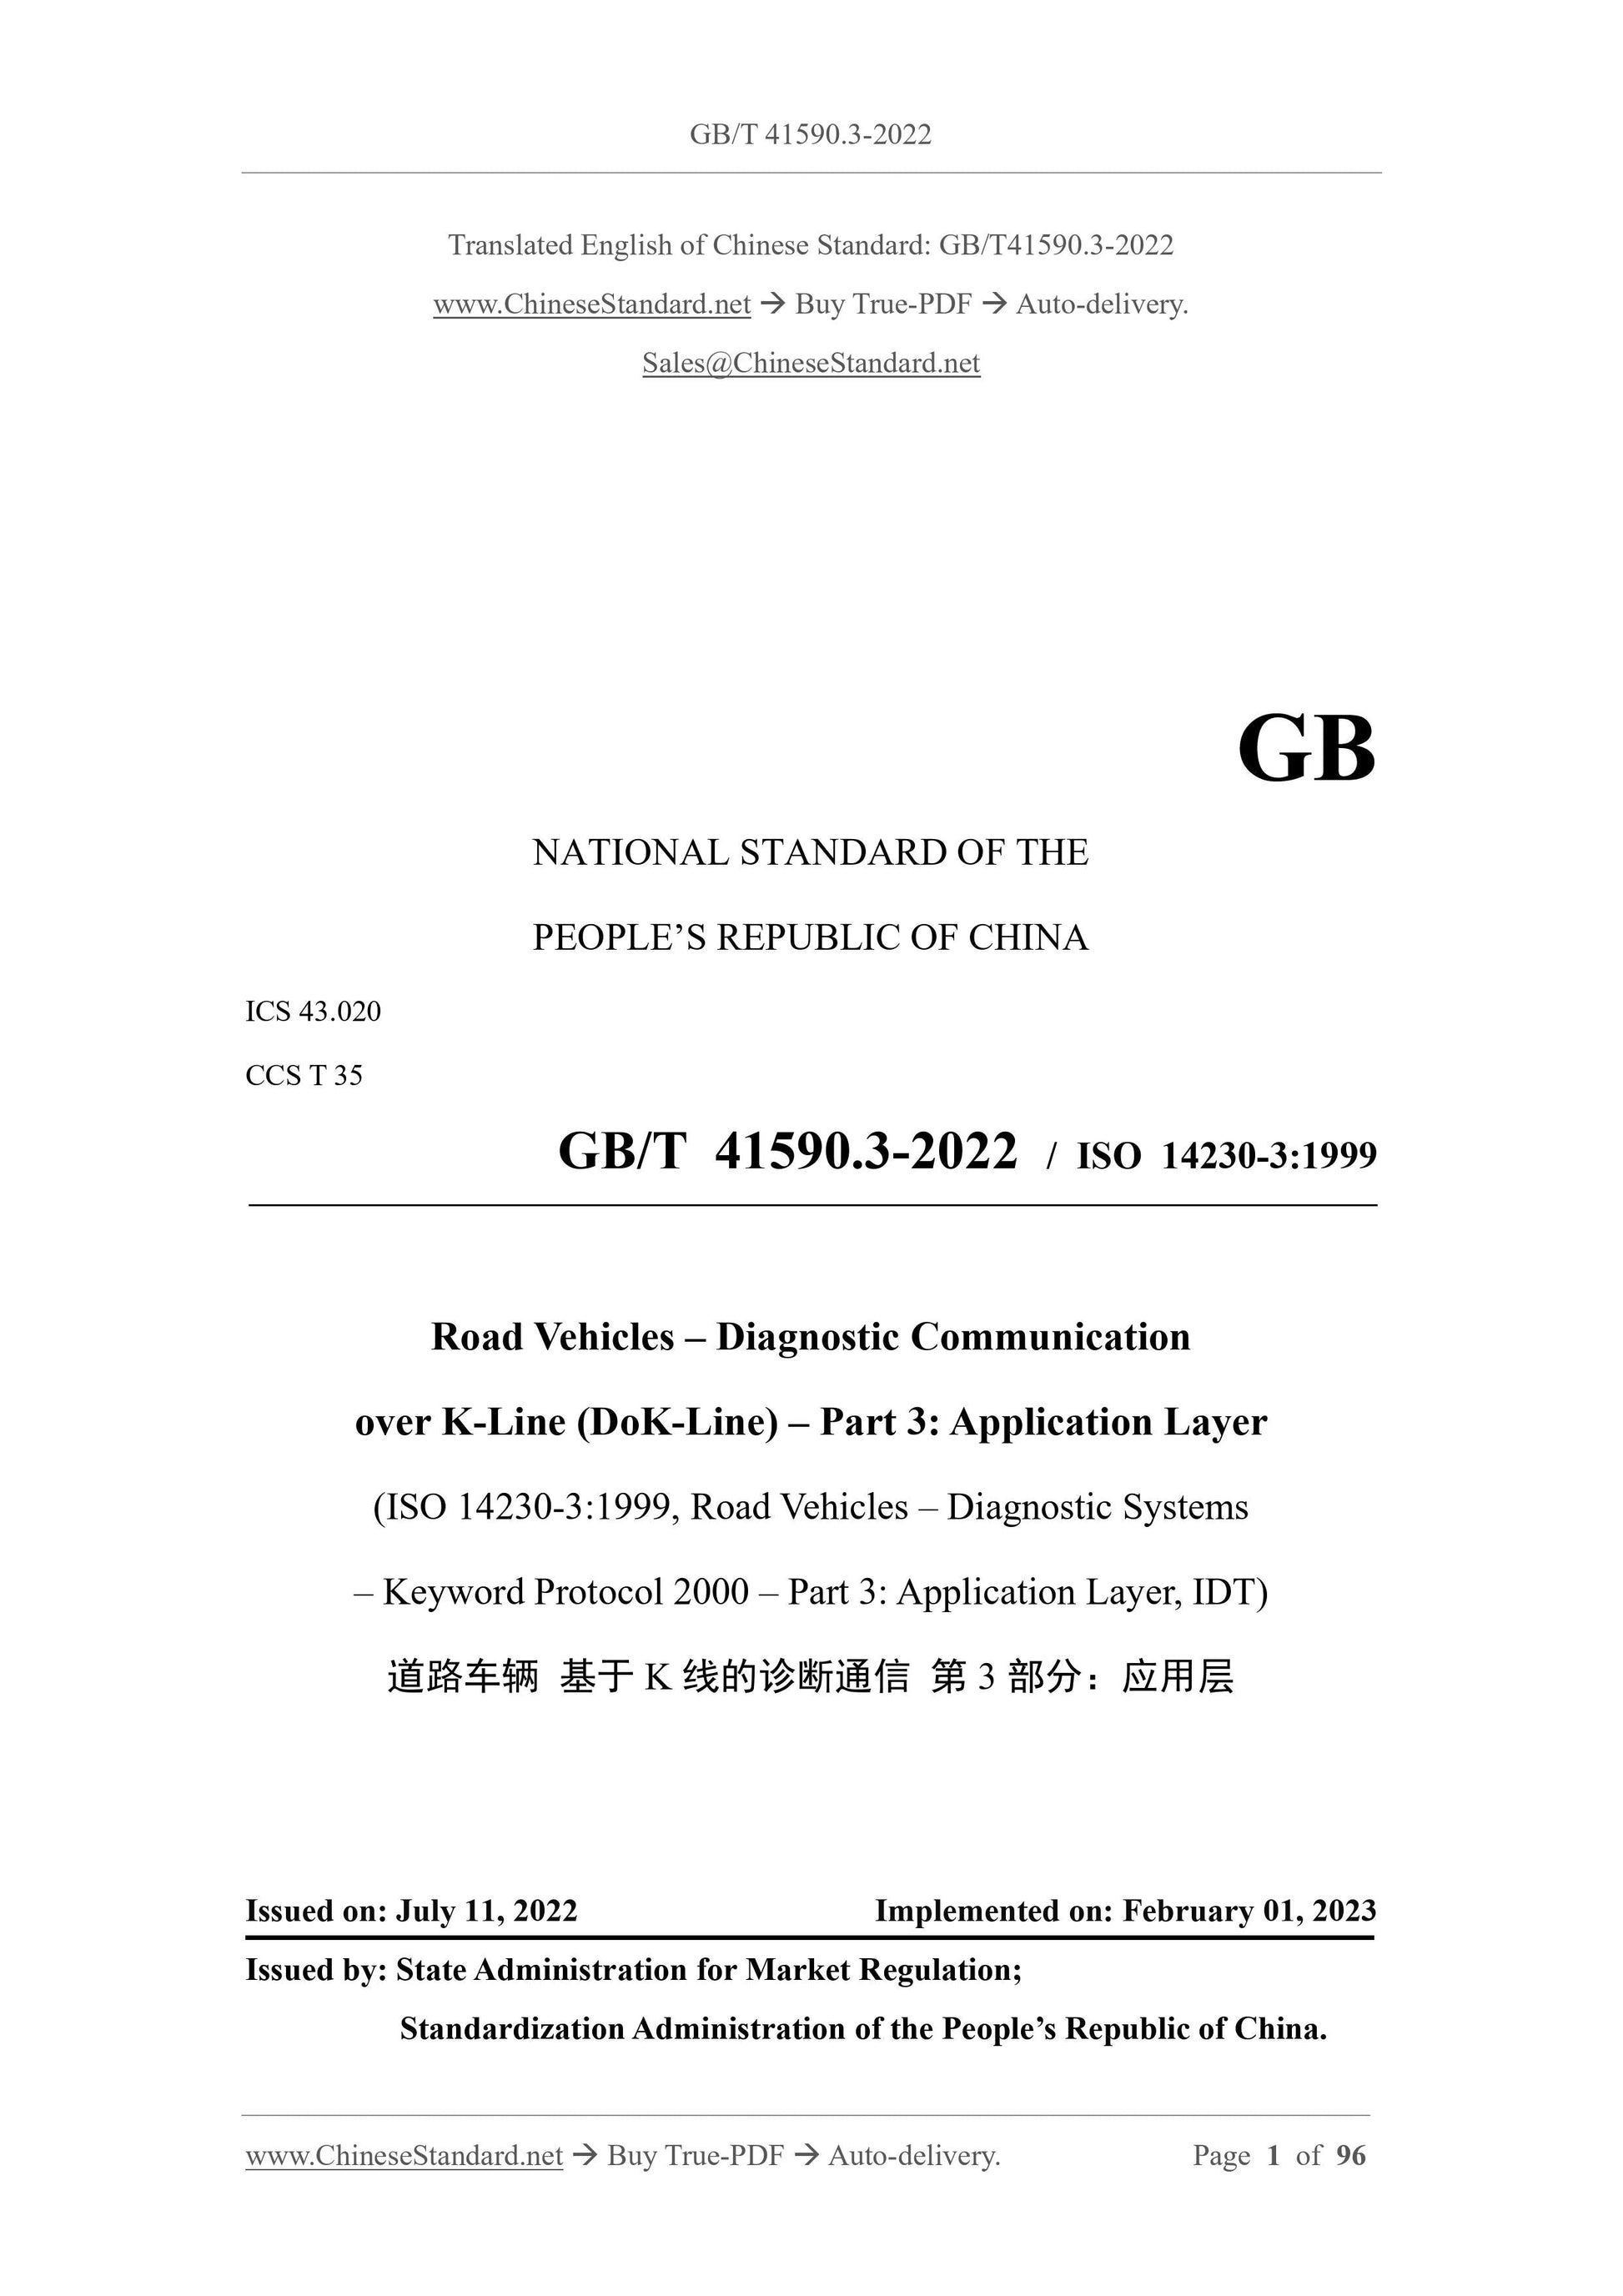 GB/T 41590.3-2022 Page 1